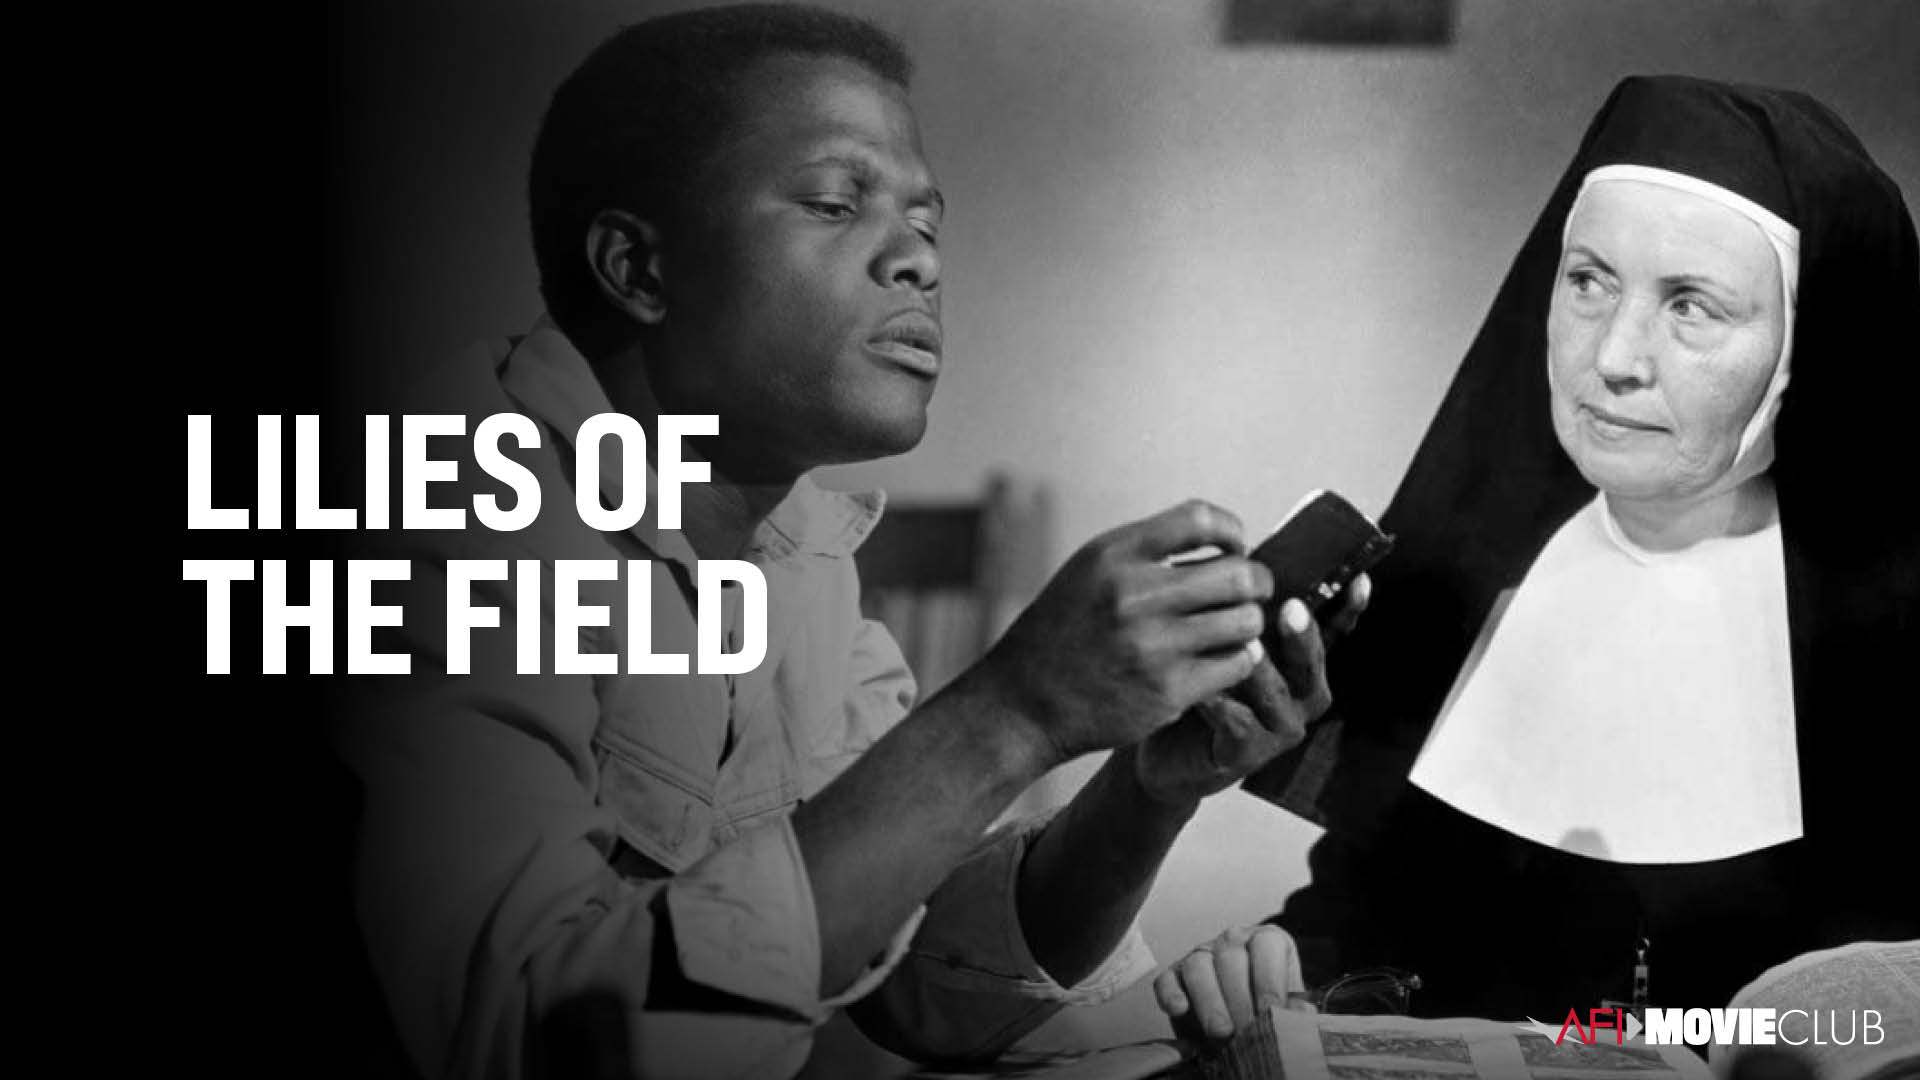 Lilies of the Field Film Still - Sidney Poitier and Lilia Skala